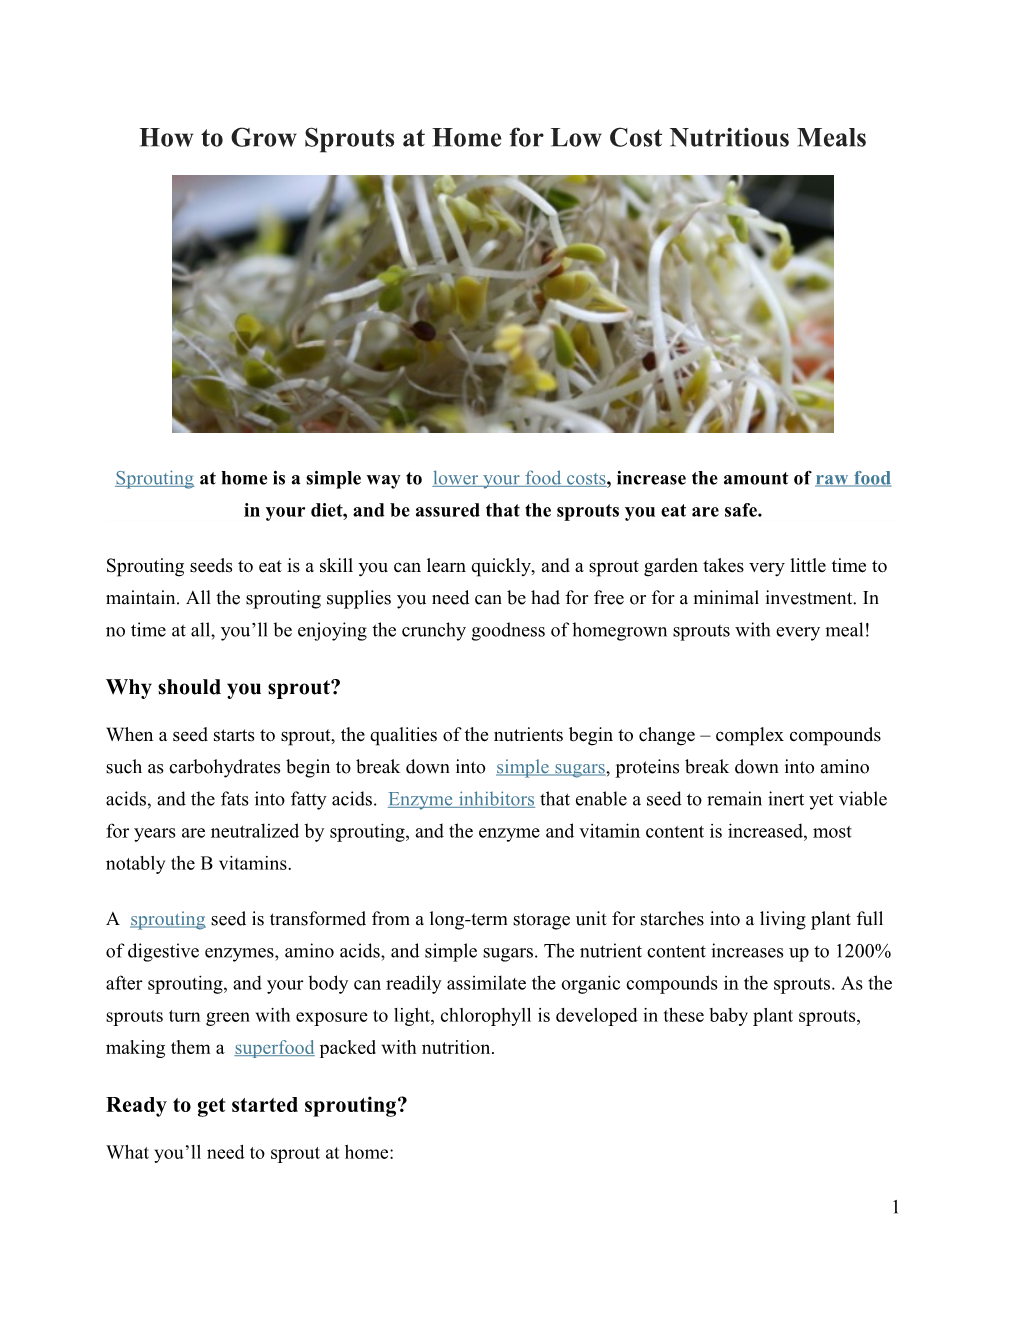 How to Grow Sprouts at Home for Low Cost Nutritious Meals